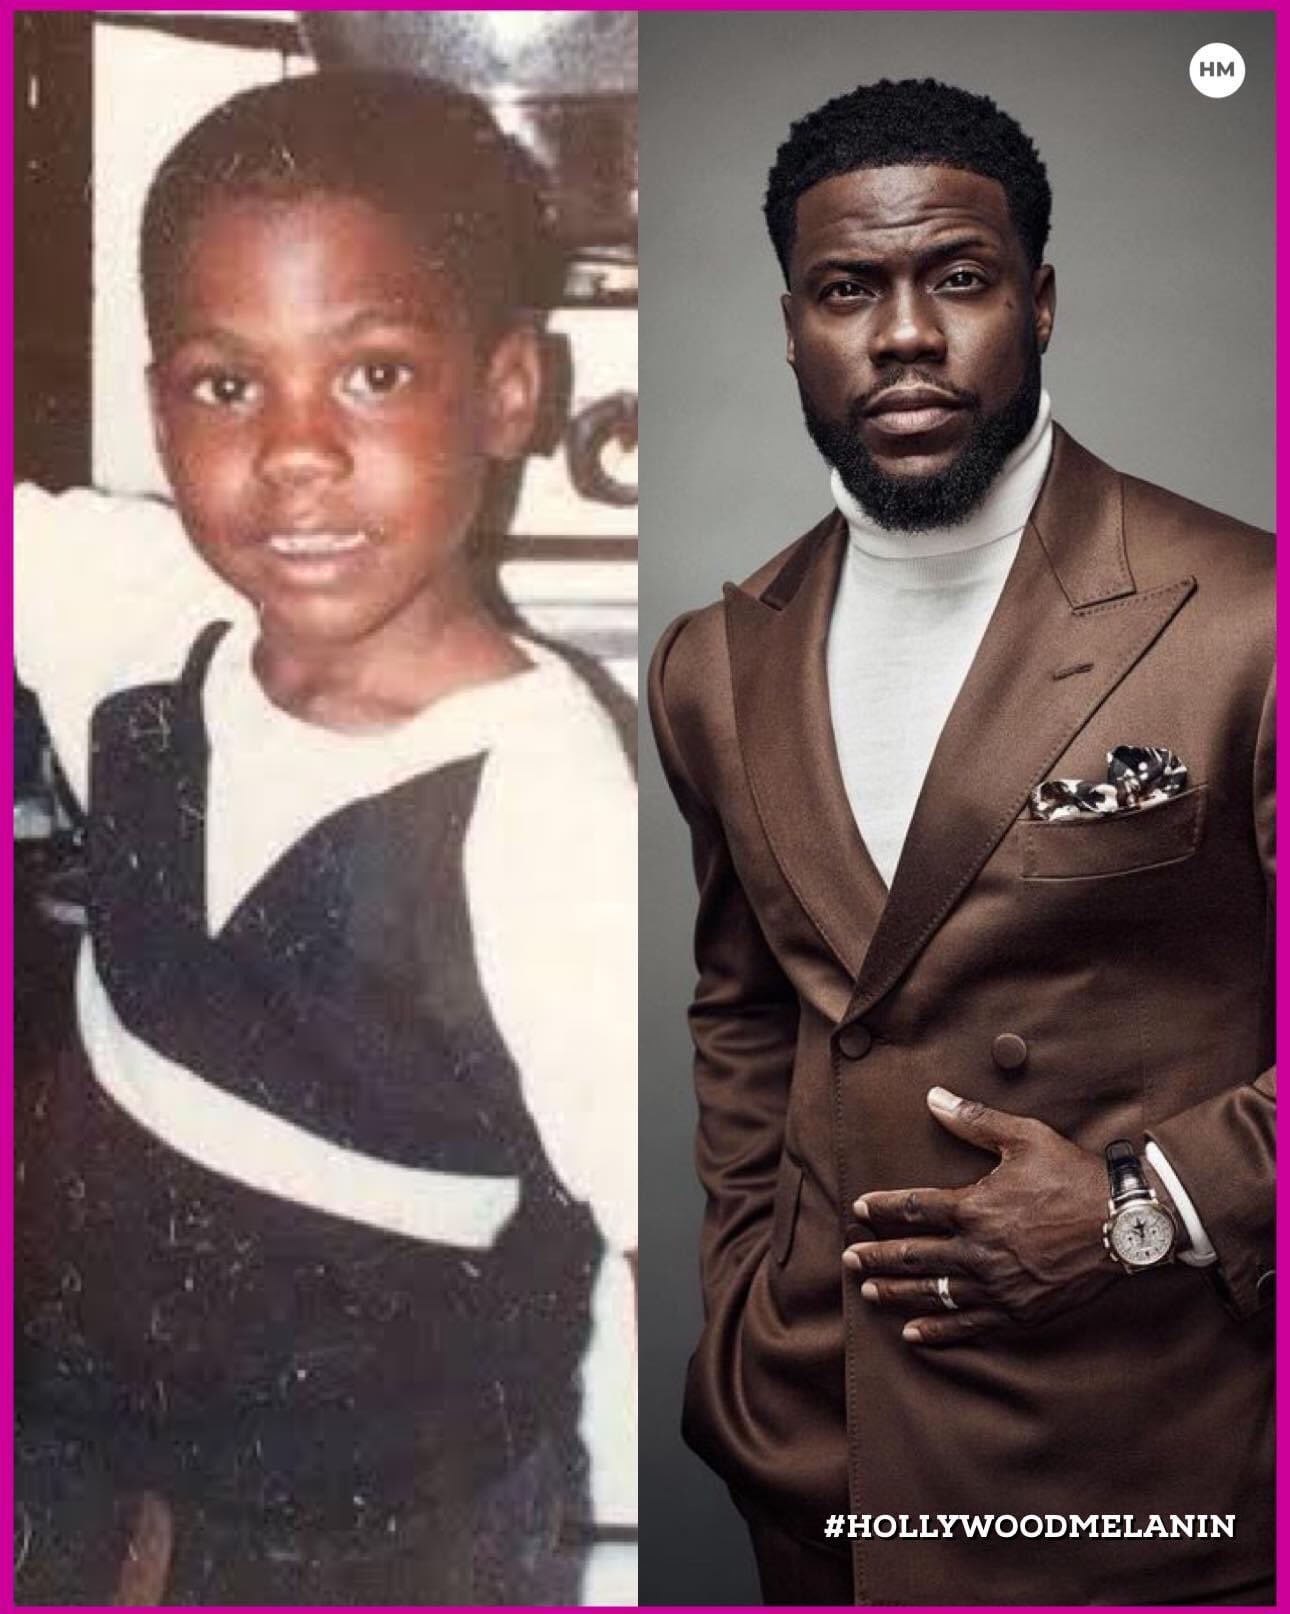 Join us in wishing a happy birthday to Kevin Hart!  